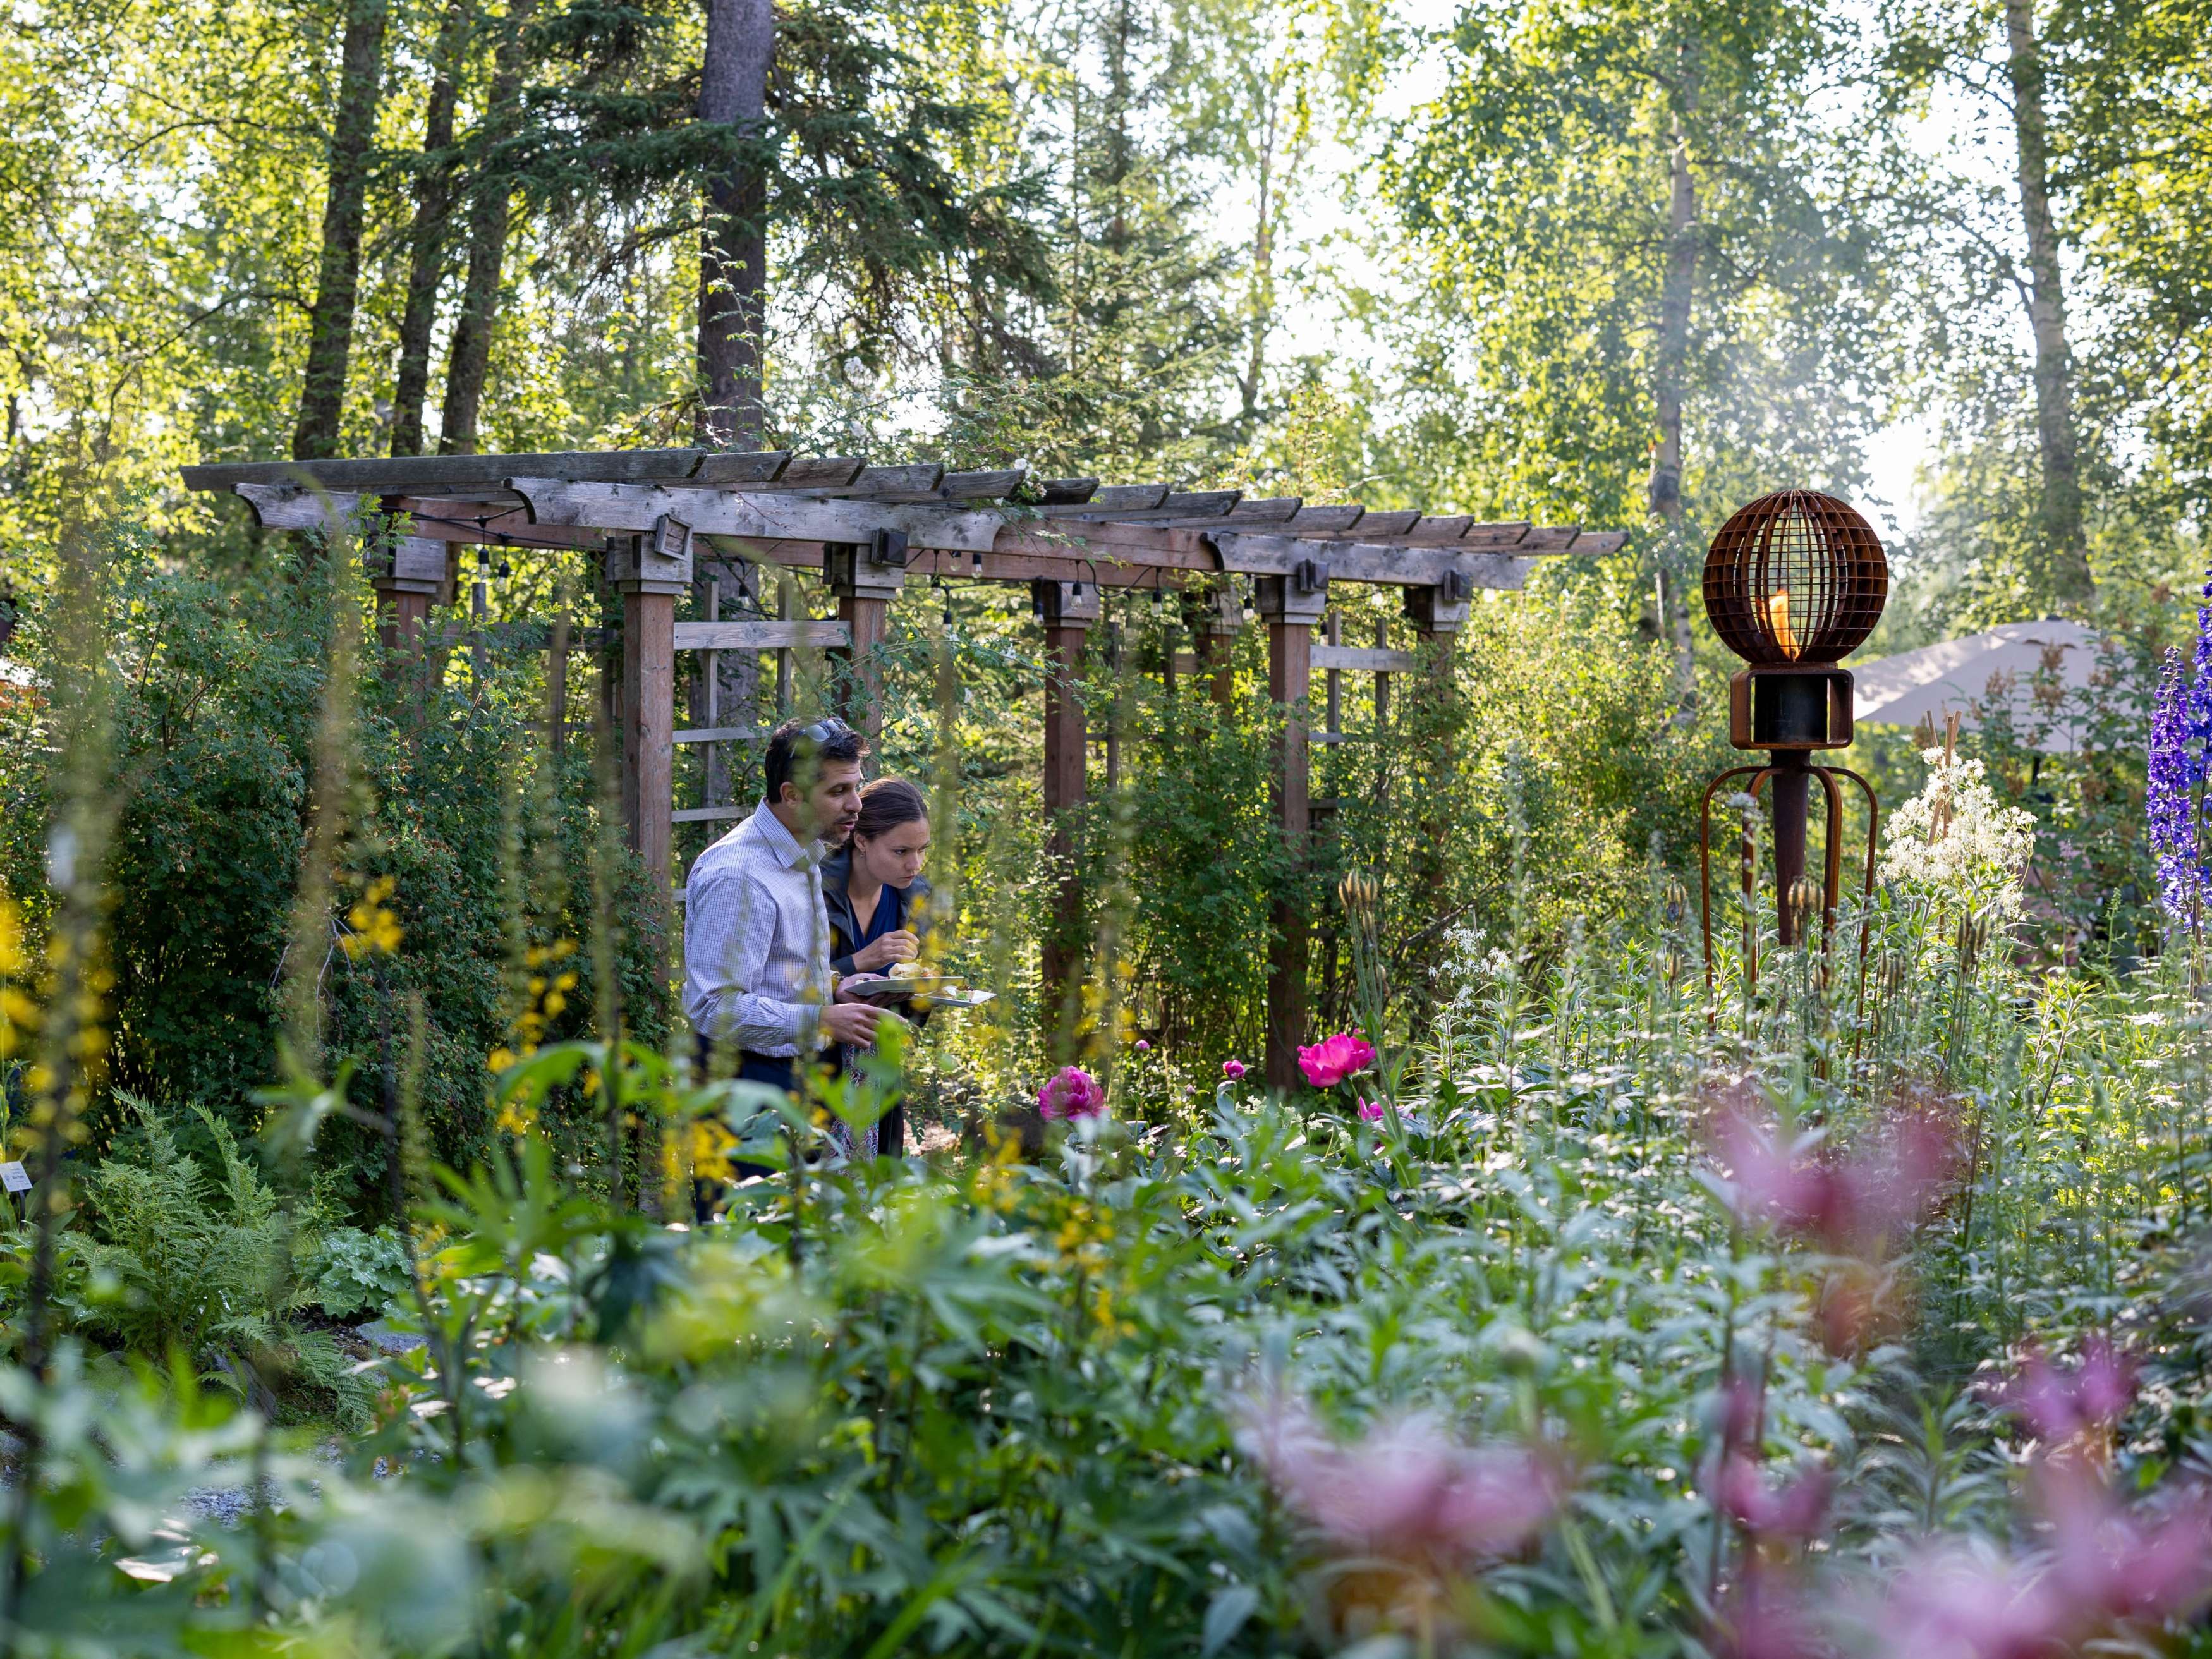 Two adults walk through a botanical garden with a wooden structure behind them.